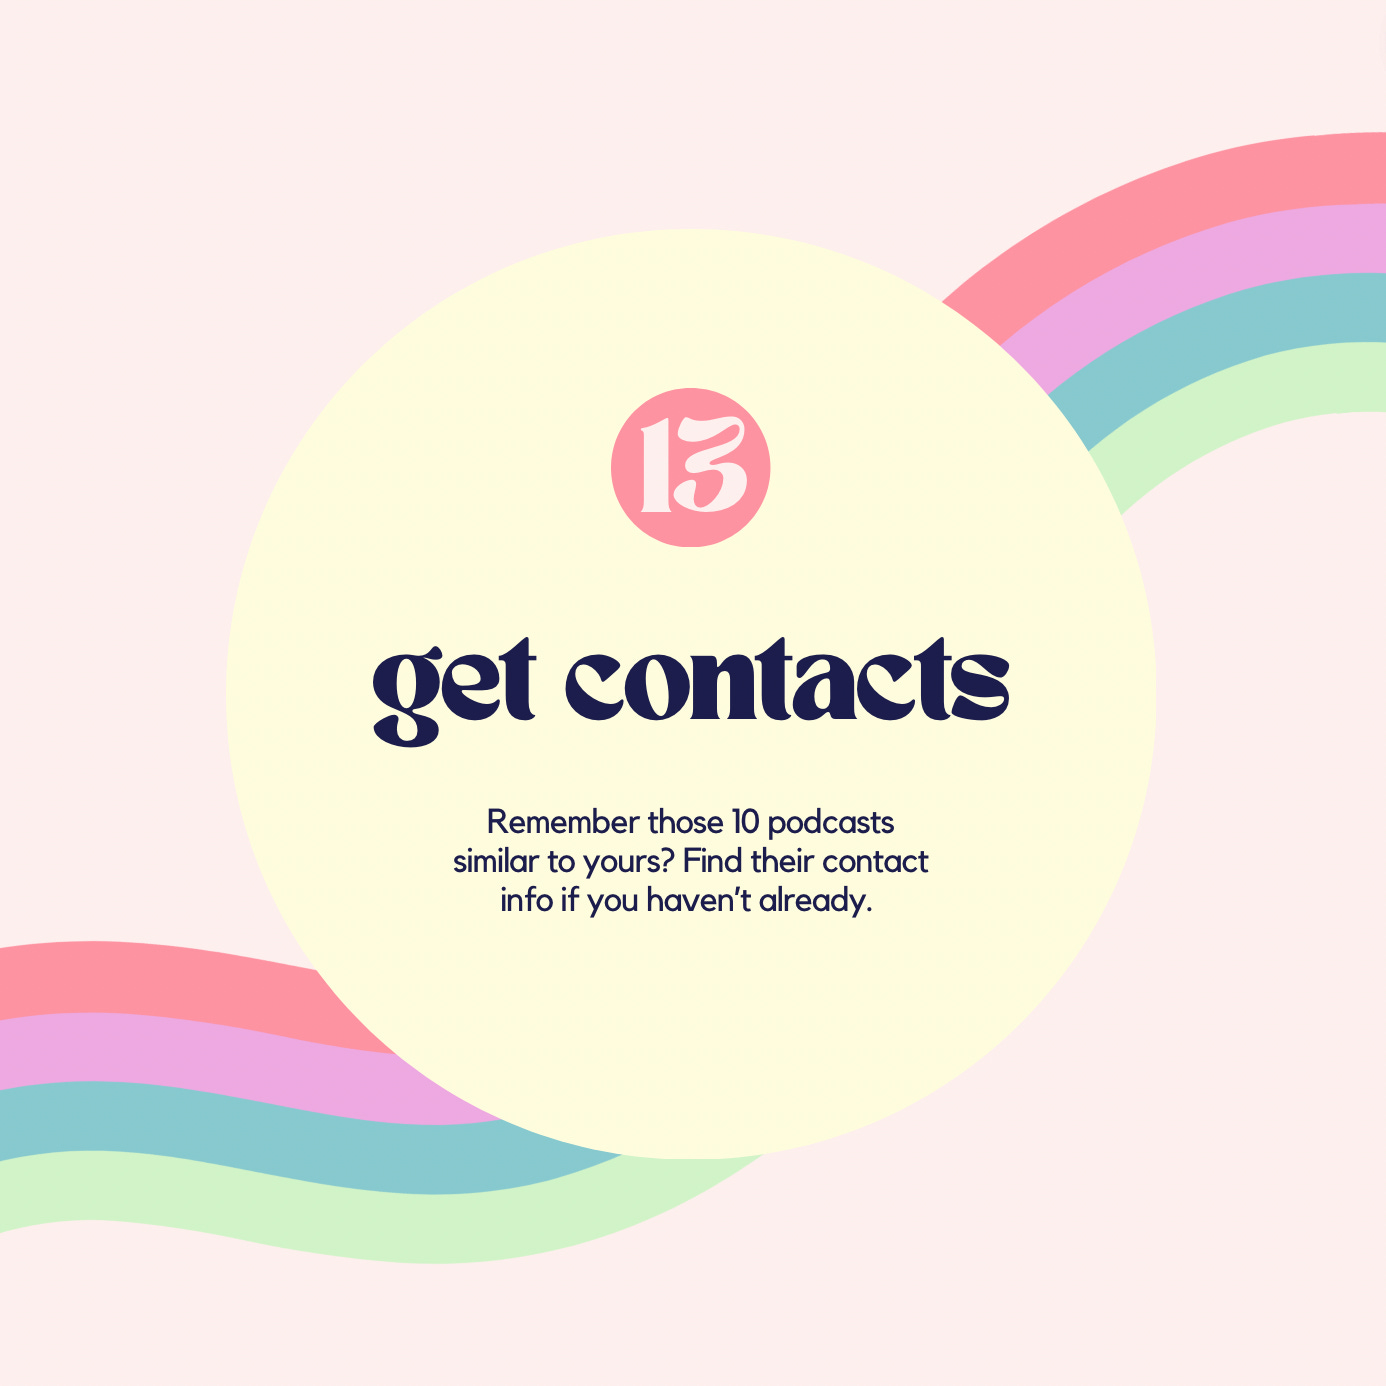 #13. Get contacts. Remember those 10 podcasts similar to yours? Find their contact info if you haven’t already. 